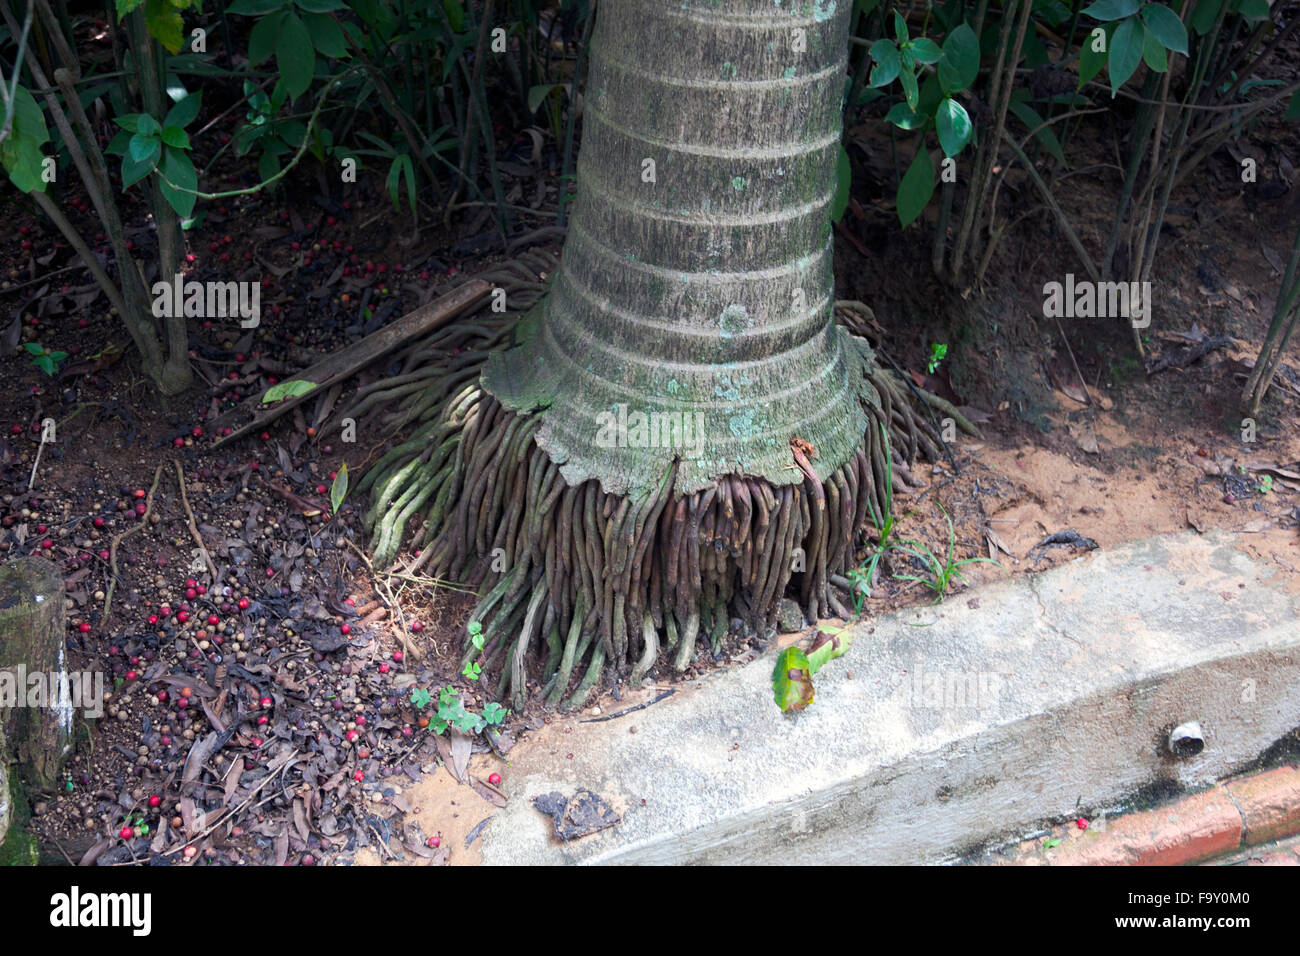 A palm tree with exposed roots (fibrous root system) in Brazil Stock Photo